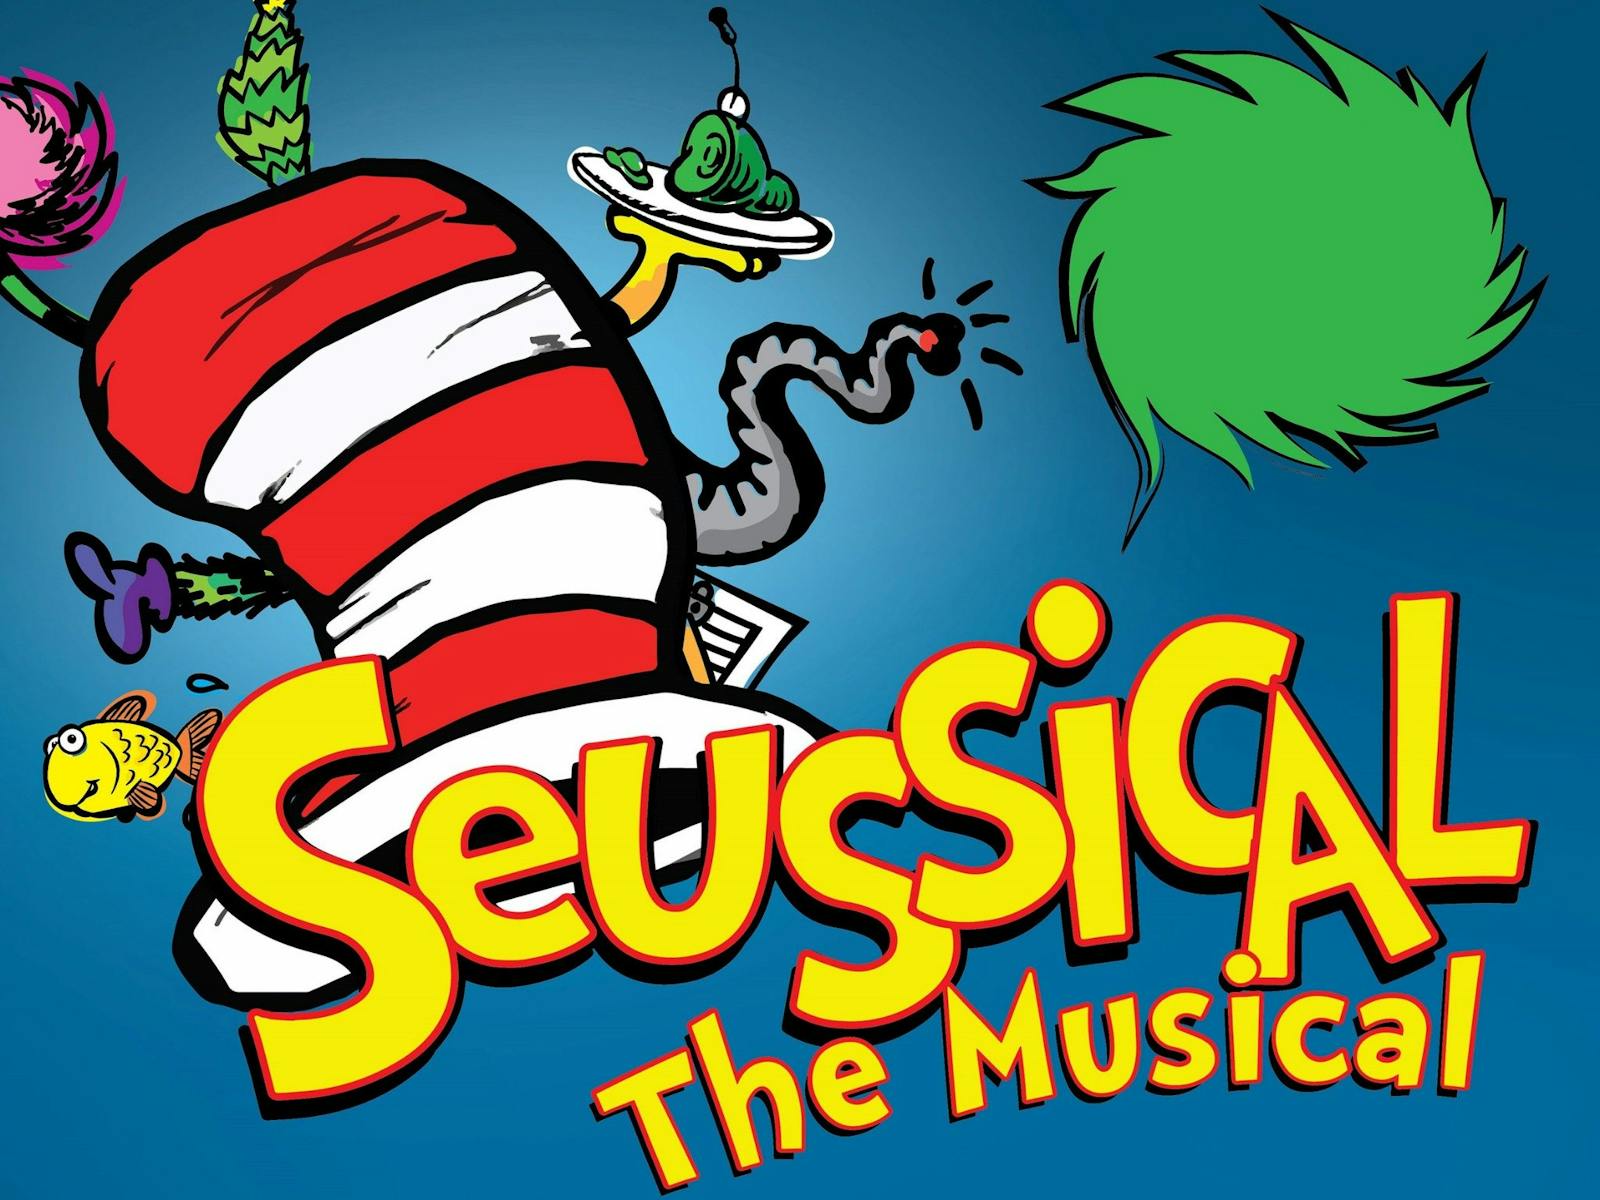 Image for St. Augustine's Seussical the Musical